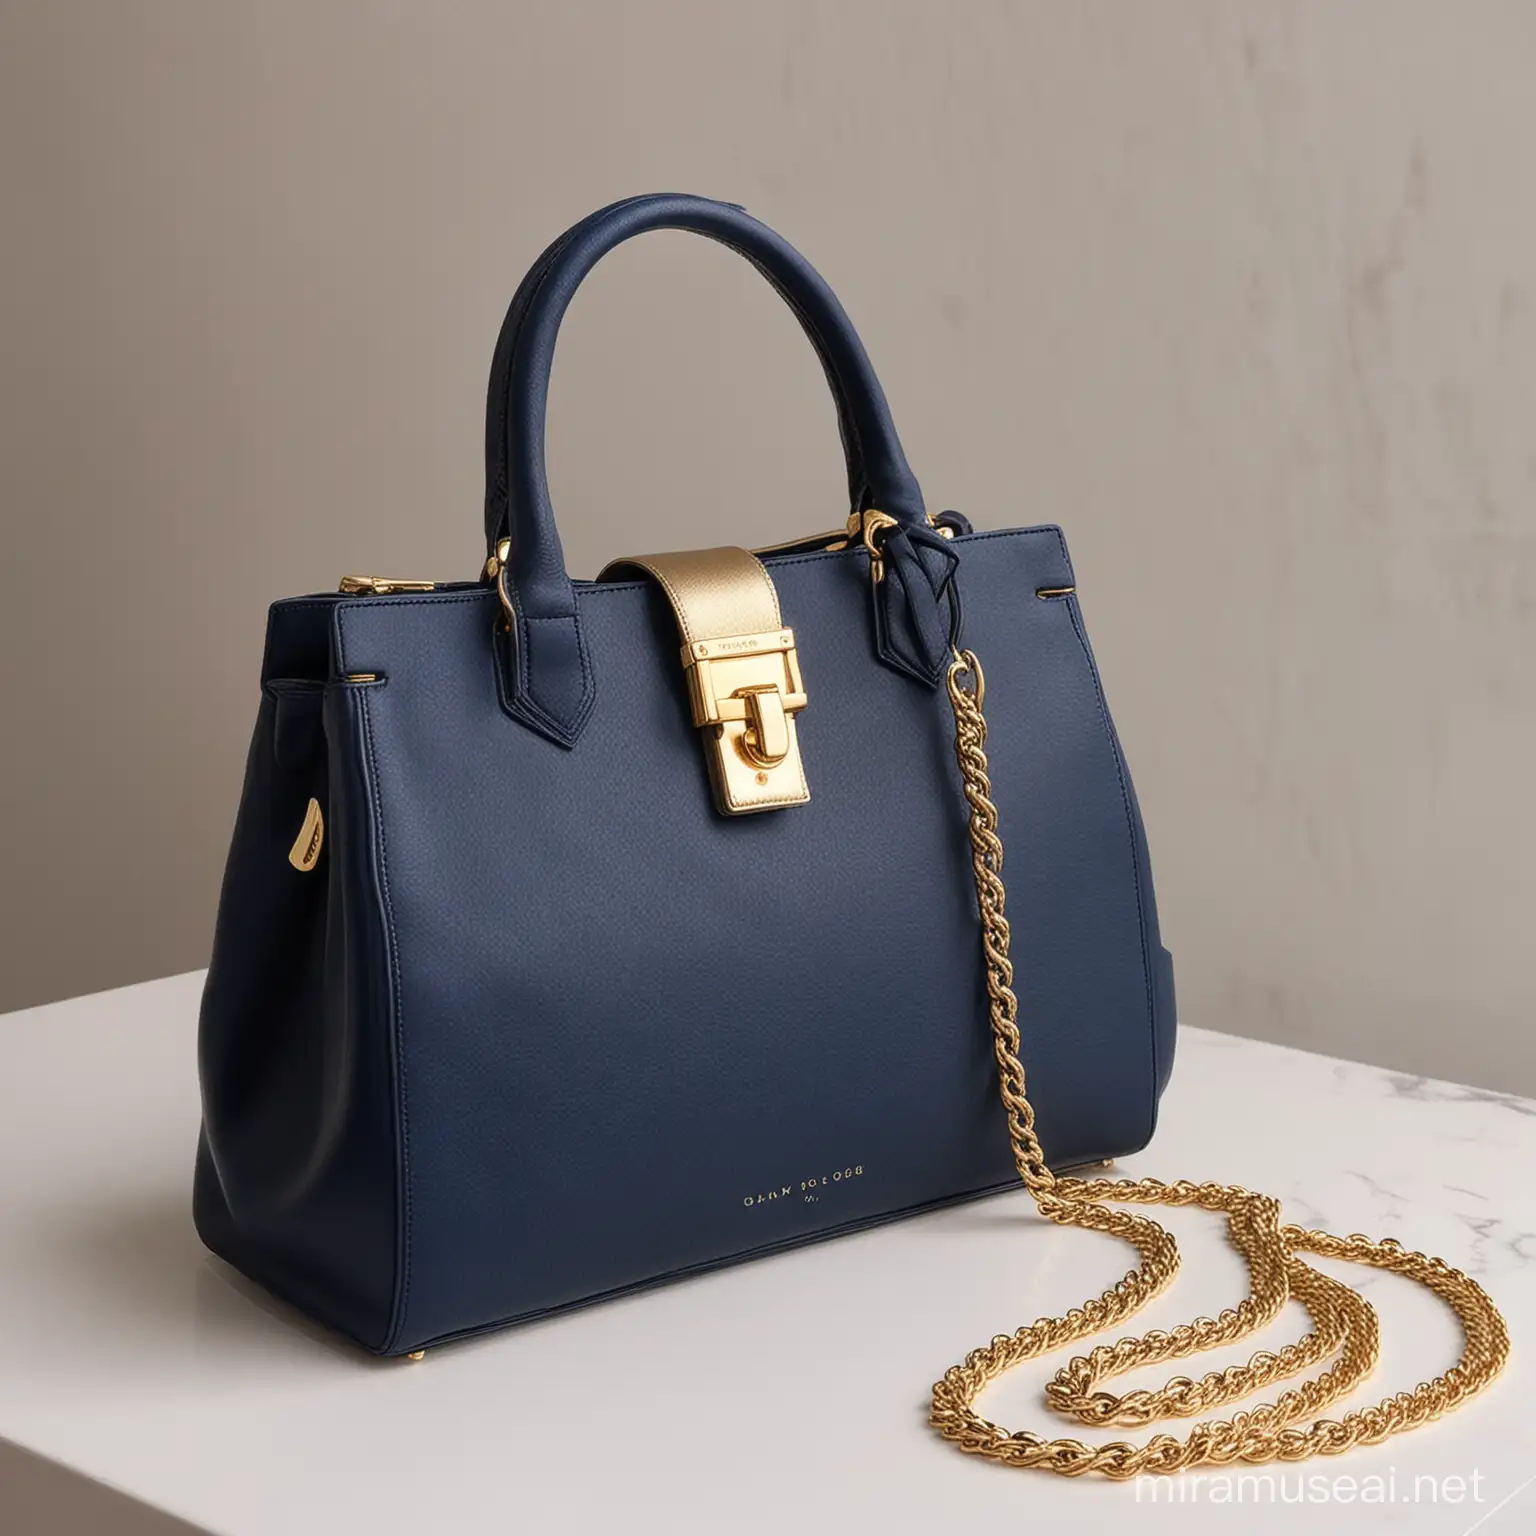 Classy Navy Blue and Gold Bag Elegant Luxury Accessories Brand